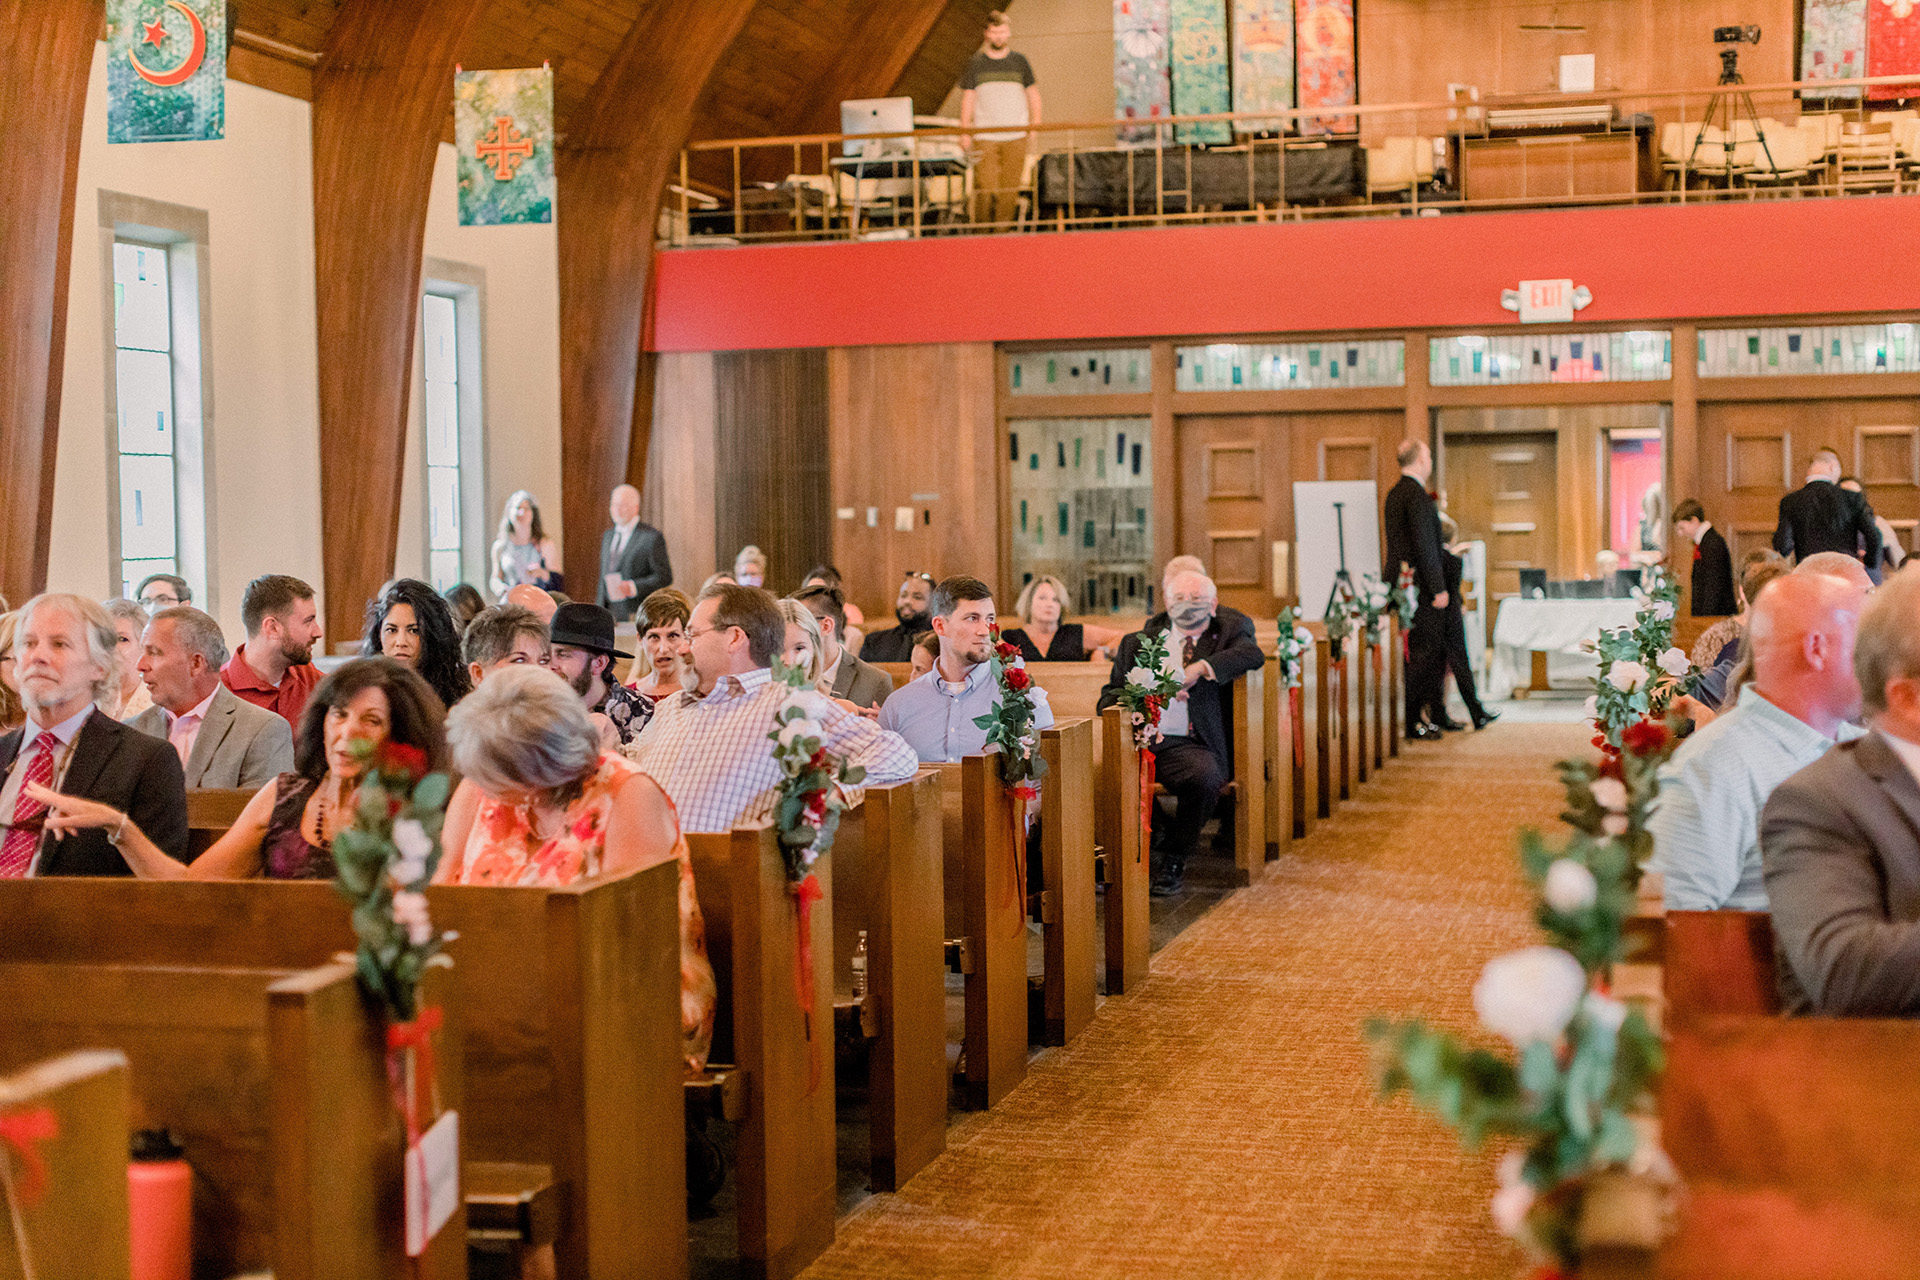 Riess-Flynn wedding in Neu Chapel. Photos by Lacey and Nate Phipps.